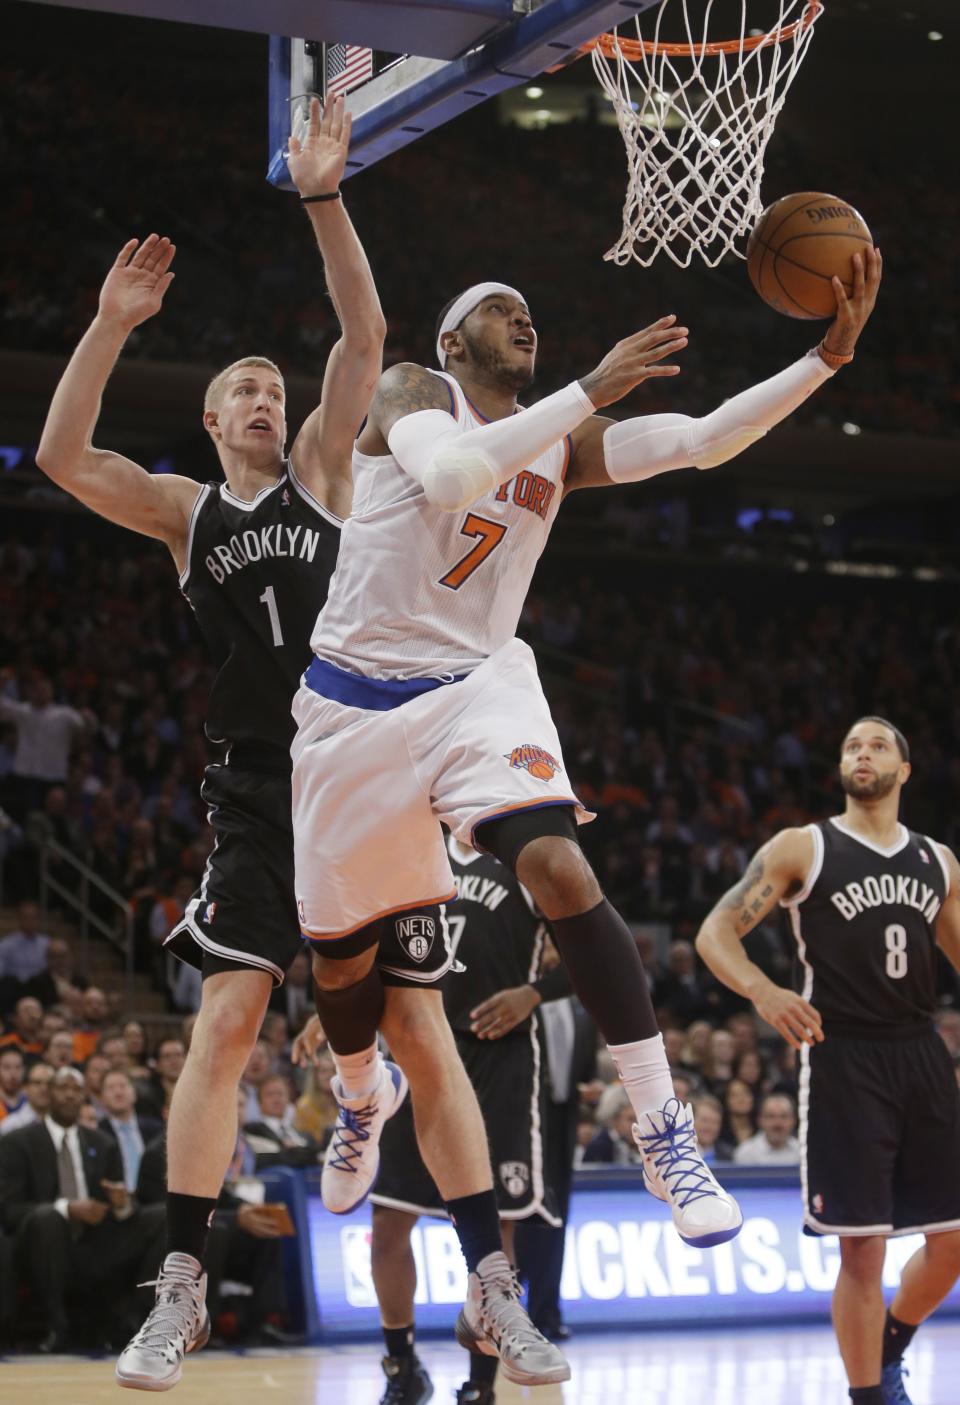 New York Knicks' Carmelo Anthony (7) drives past Brooklyn Nets' Mason Plumlee (1) during the first half of an NBA basketball game Wednesday, April 2, 2014, in New York. (AP Photo/Frank Franklin II)